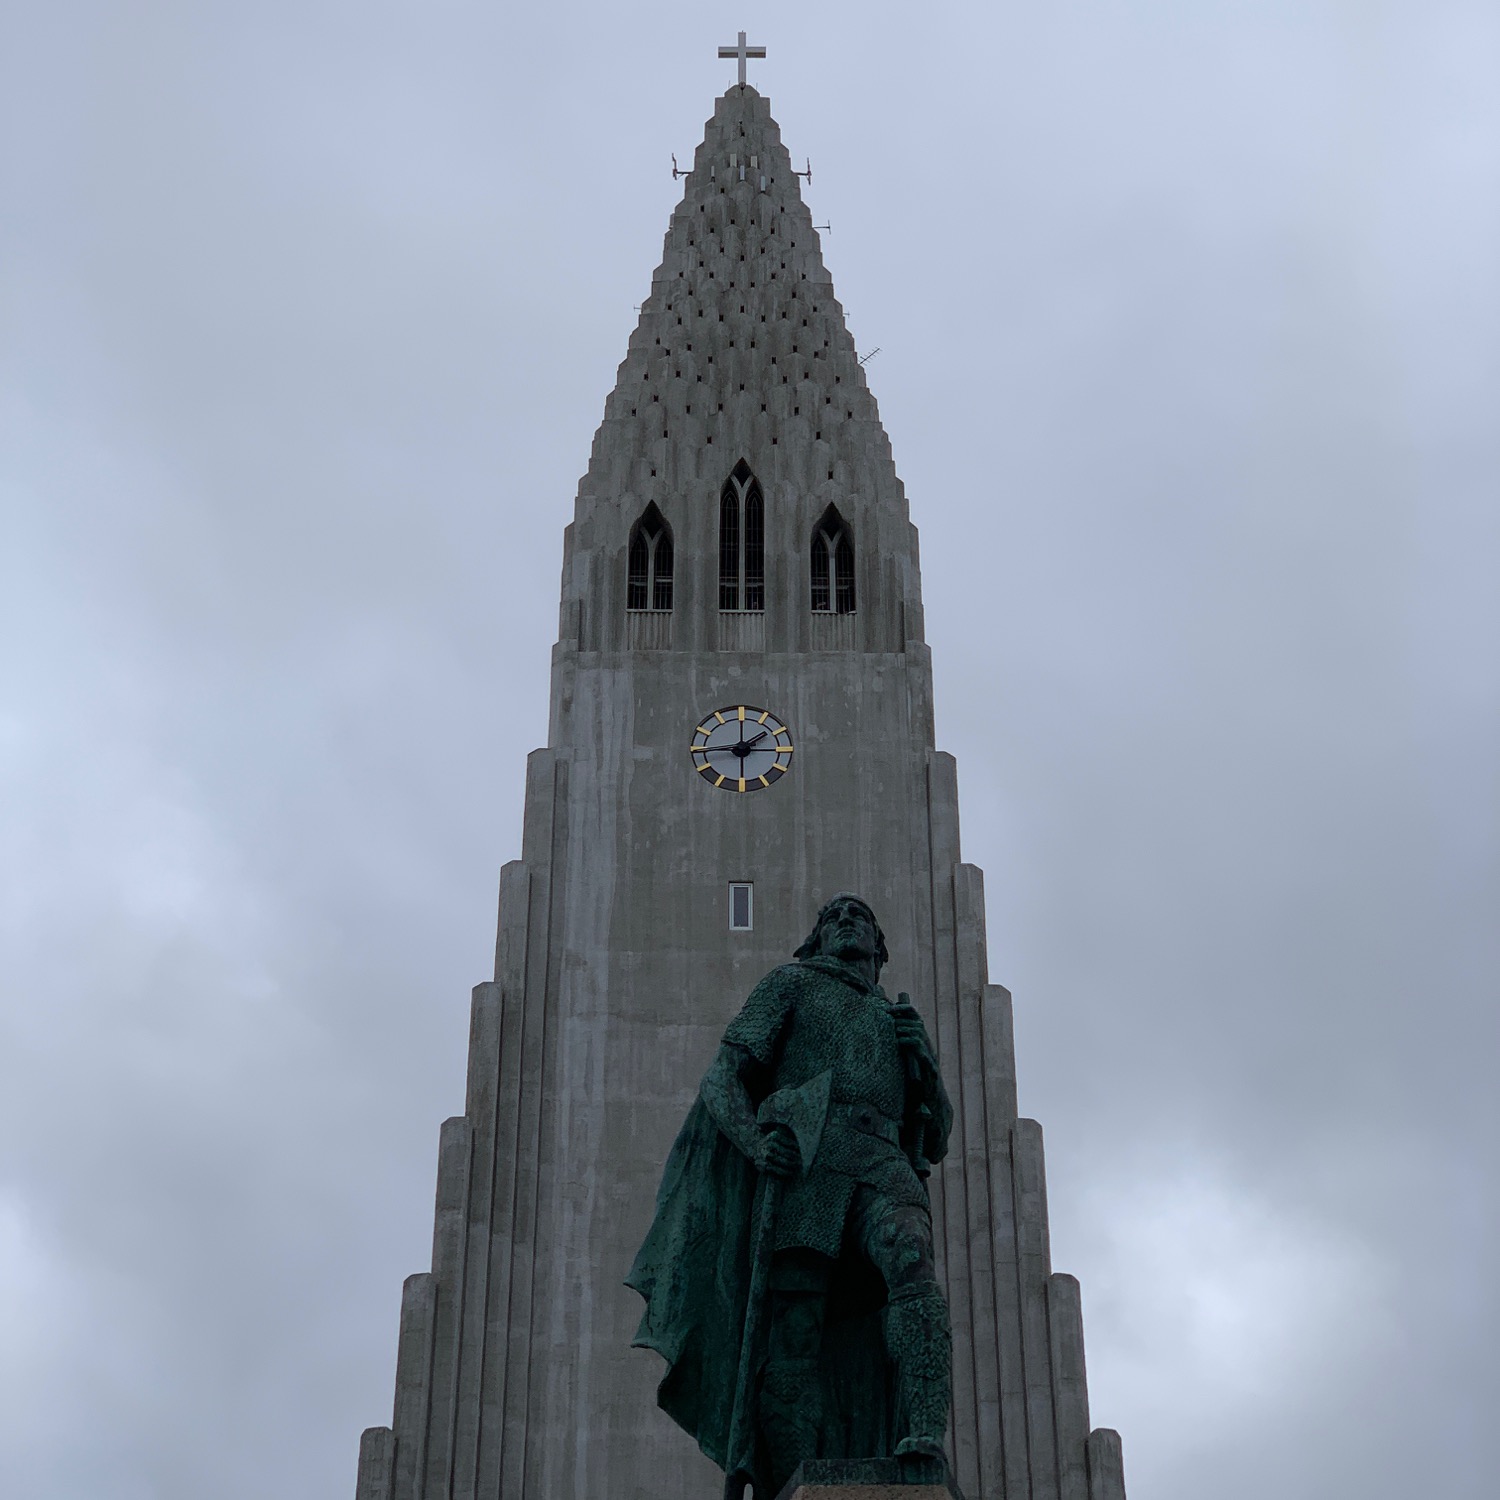 a statue of a man in front of a tall building with Hallgrímskirkja in the background